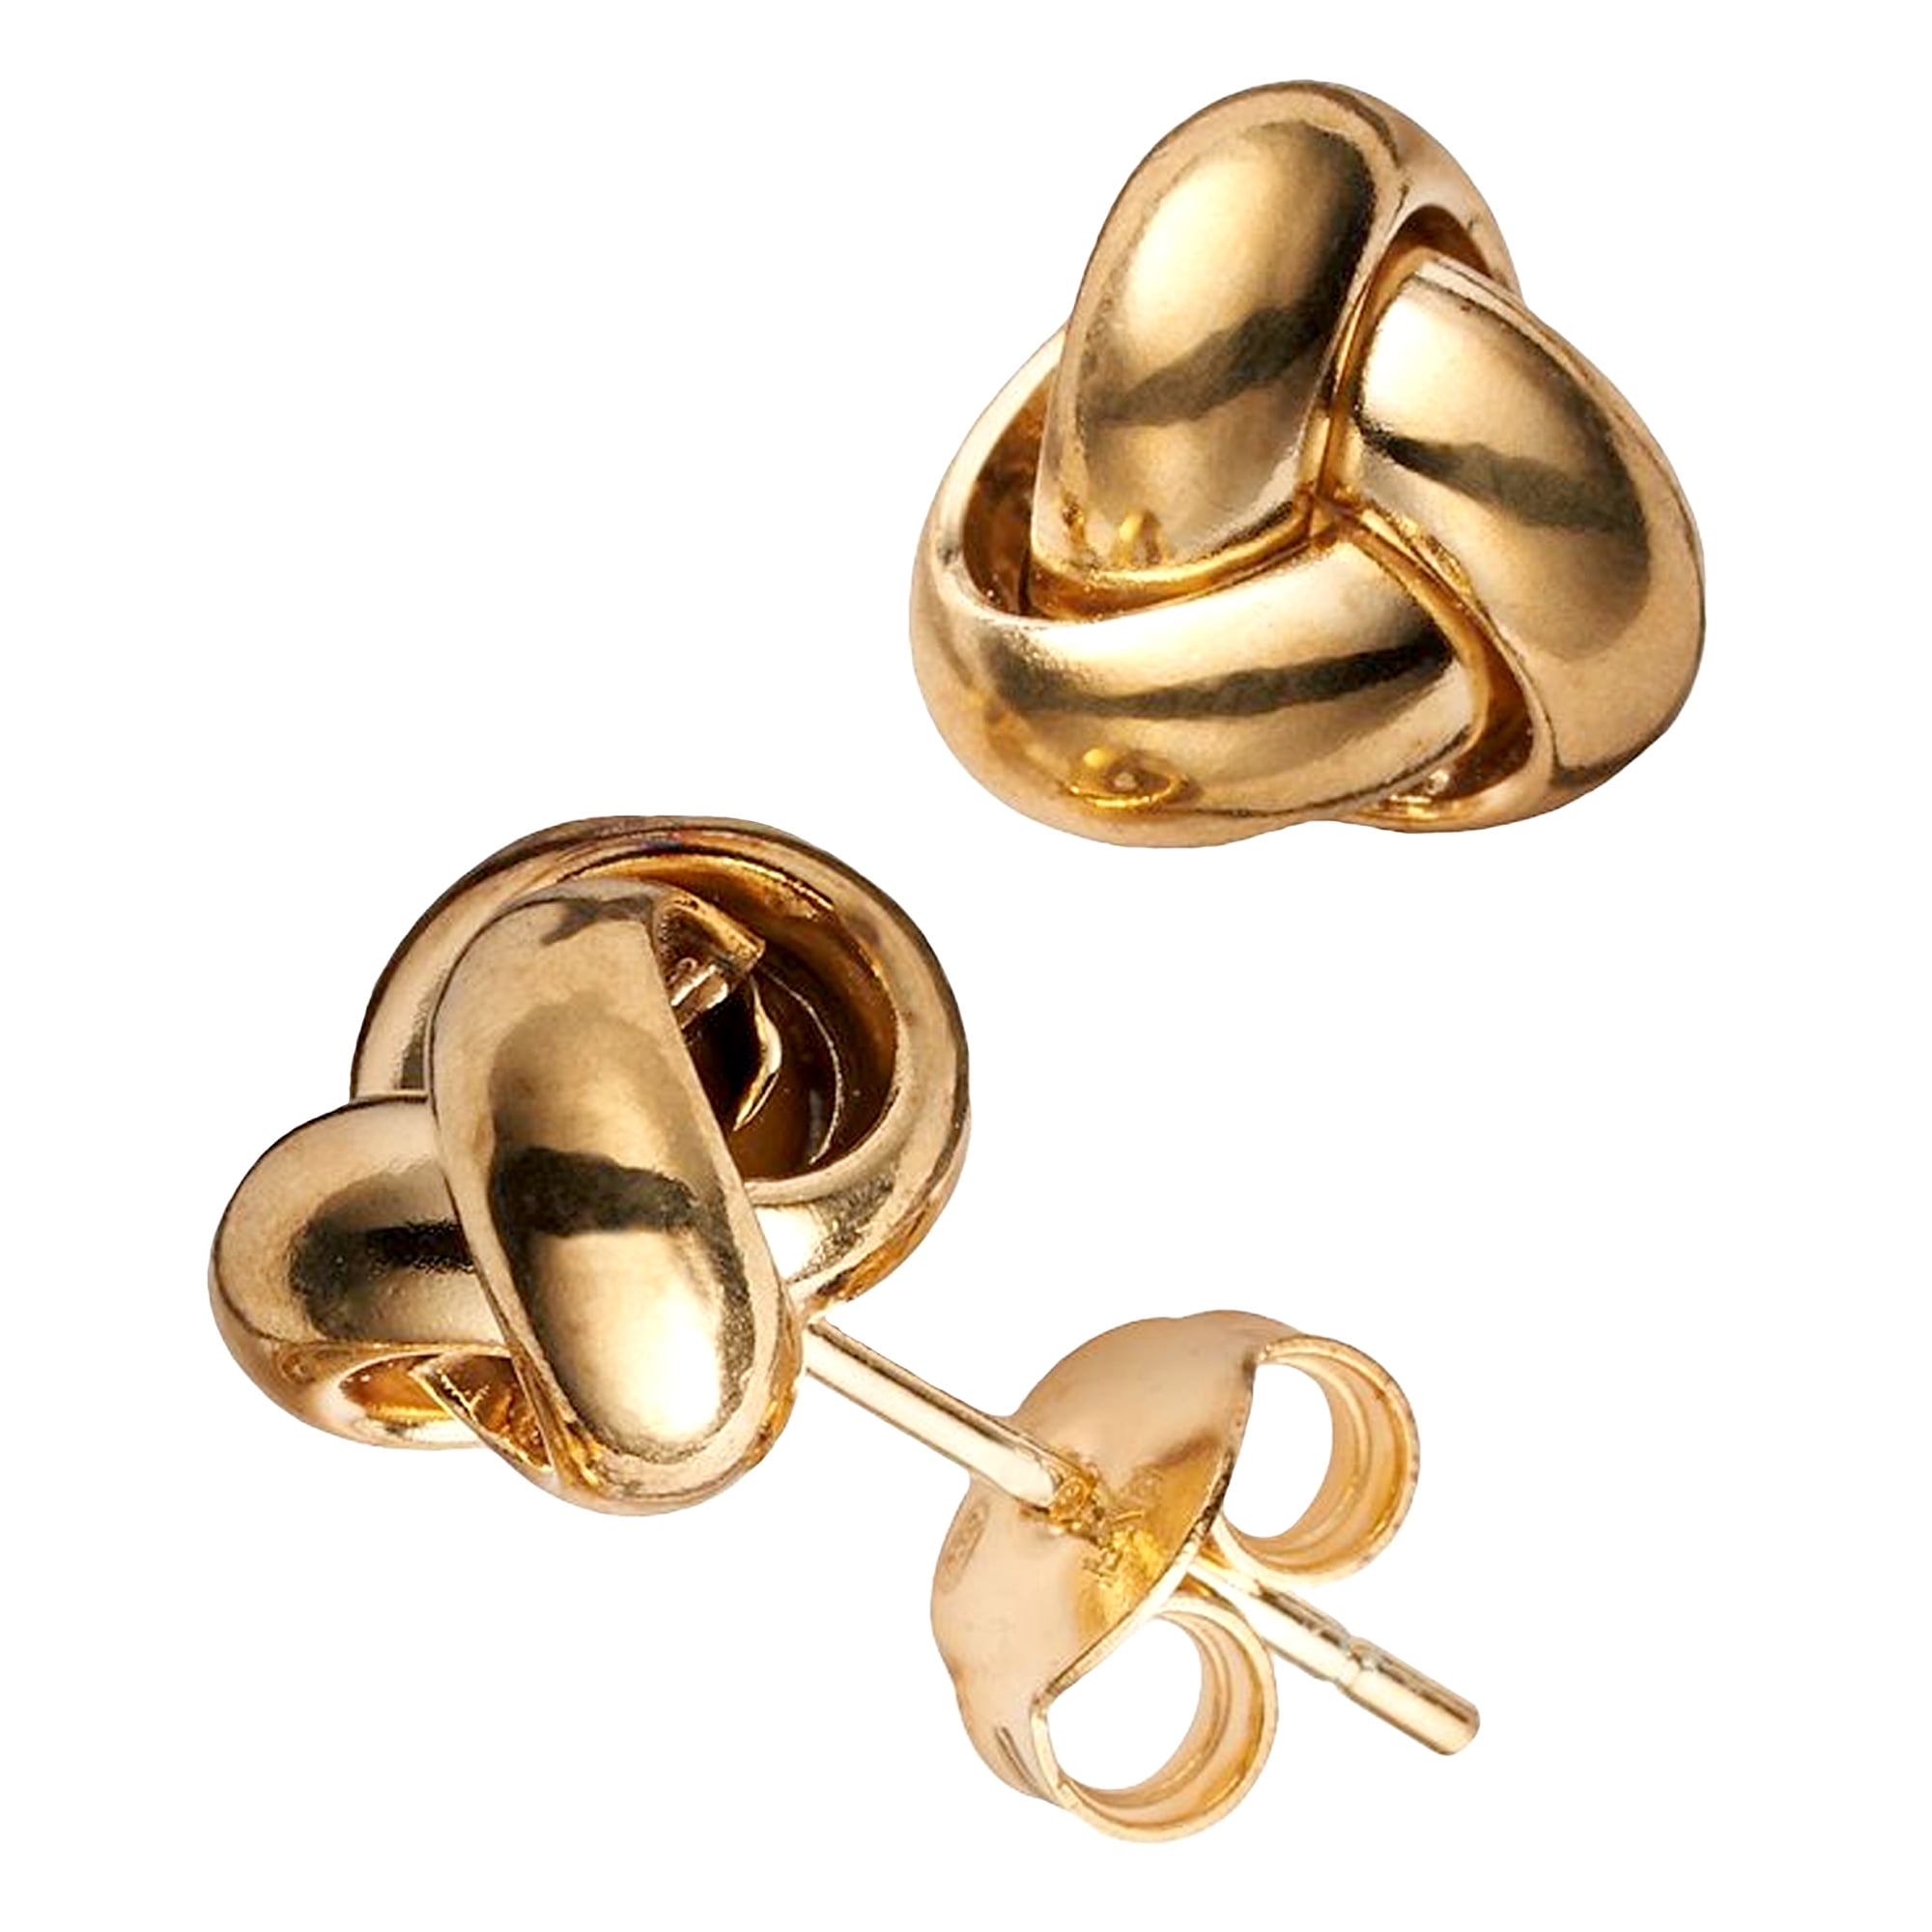 Jewelry Affairs - 10k Yellow Gold Love Knot Post Stud Earrings, 6mm